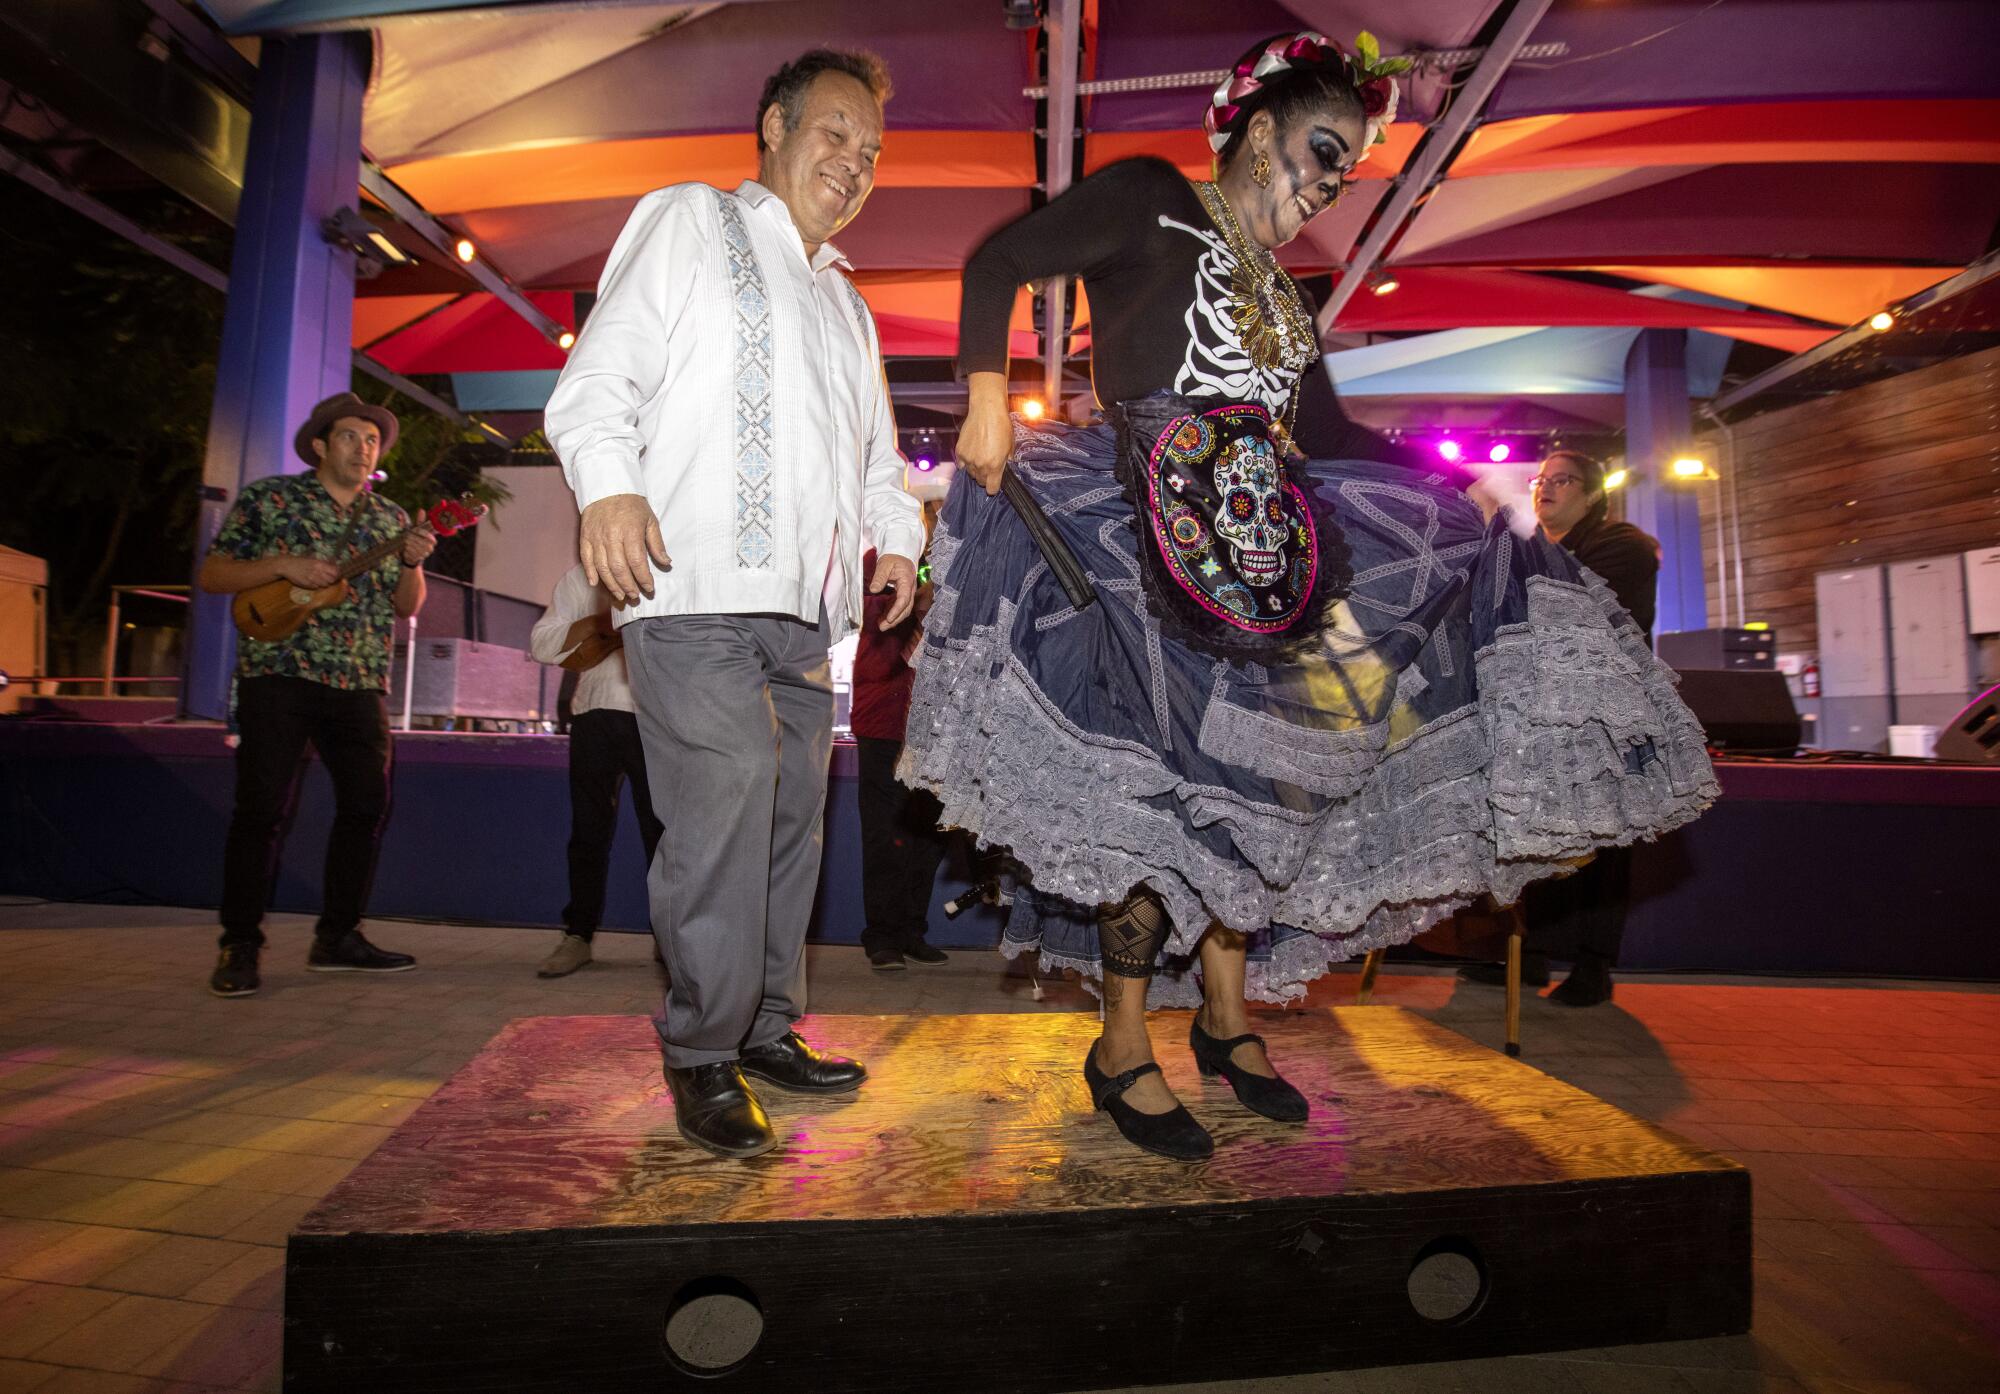 Luis Garcia dances with Delilah Vasquez during the Fandango at the end of the event.